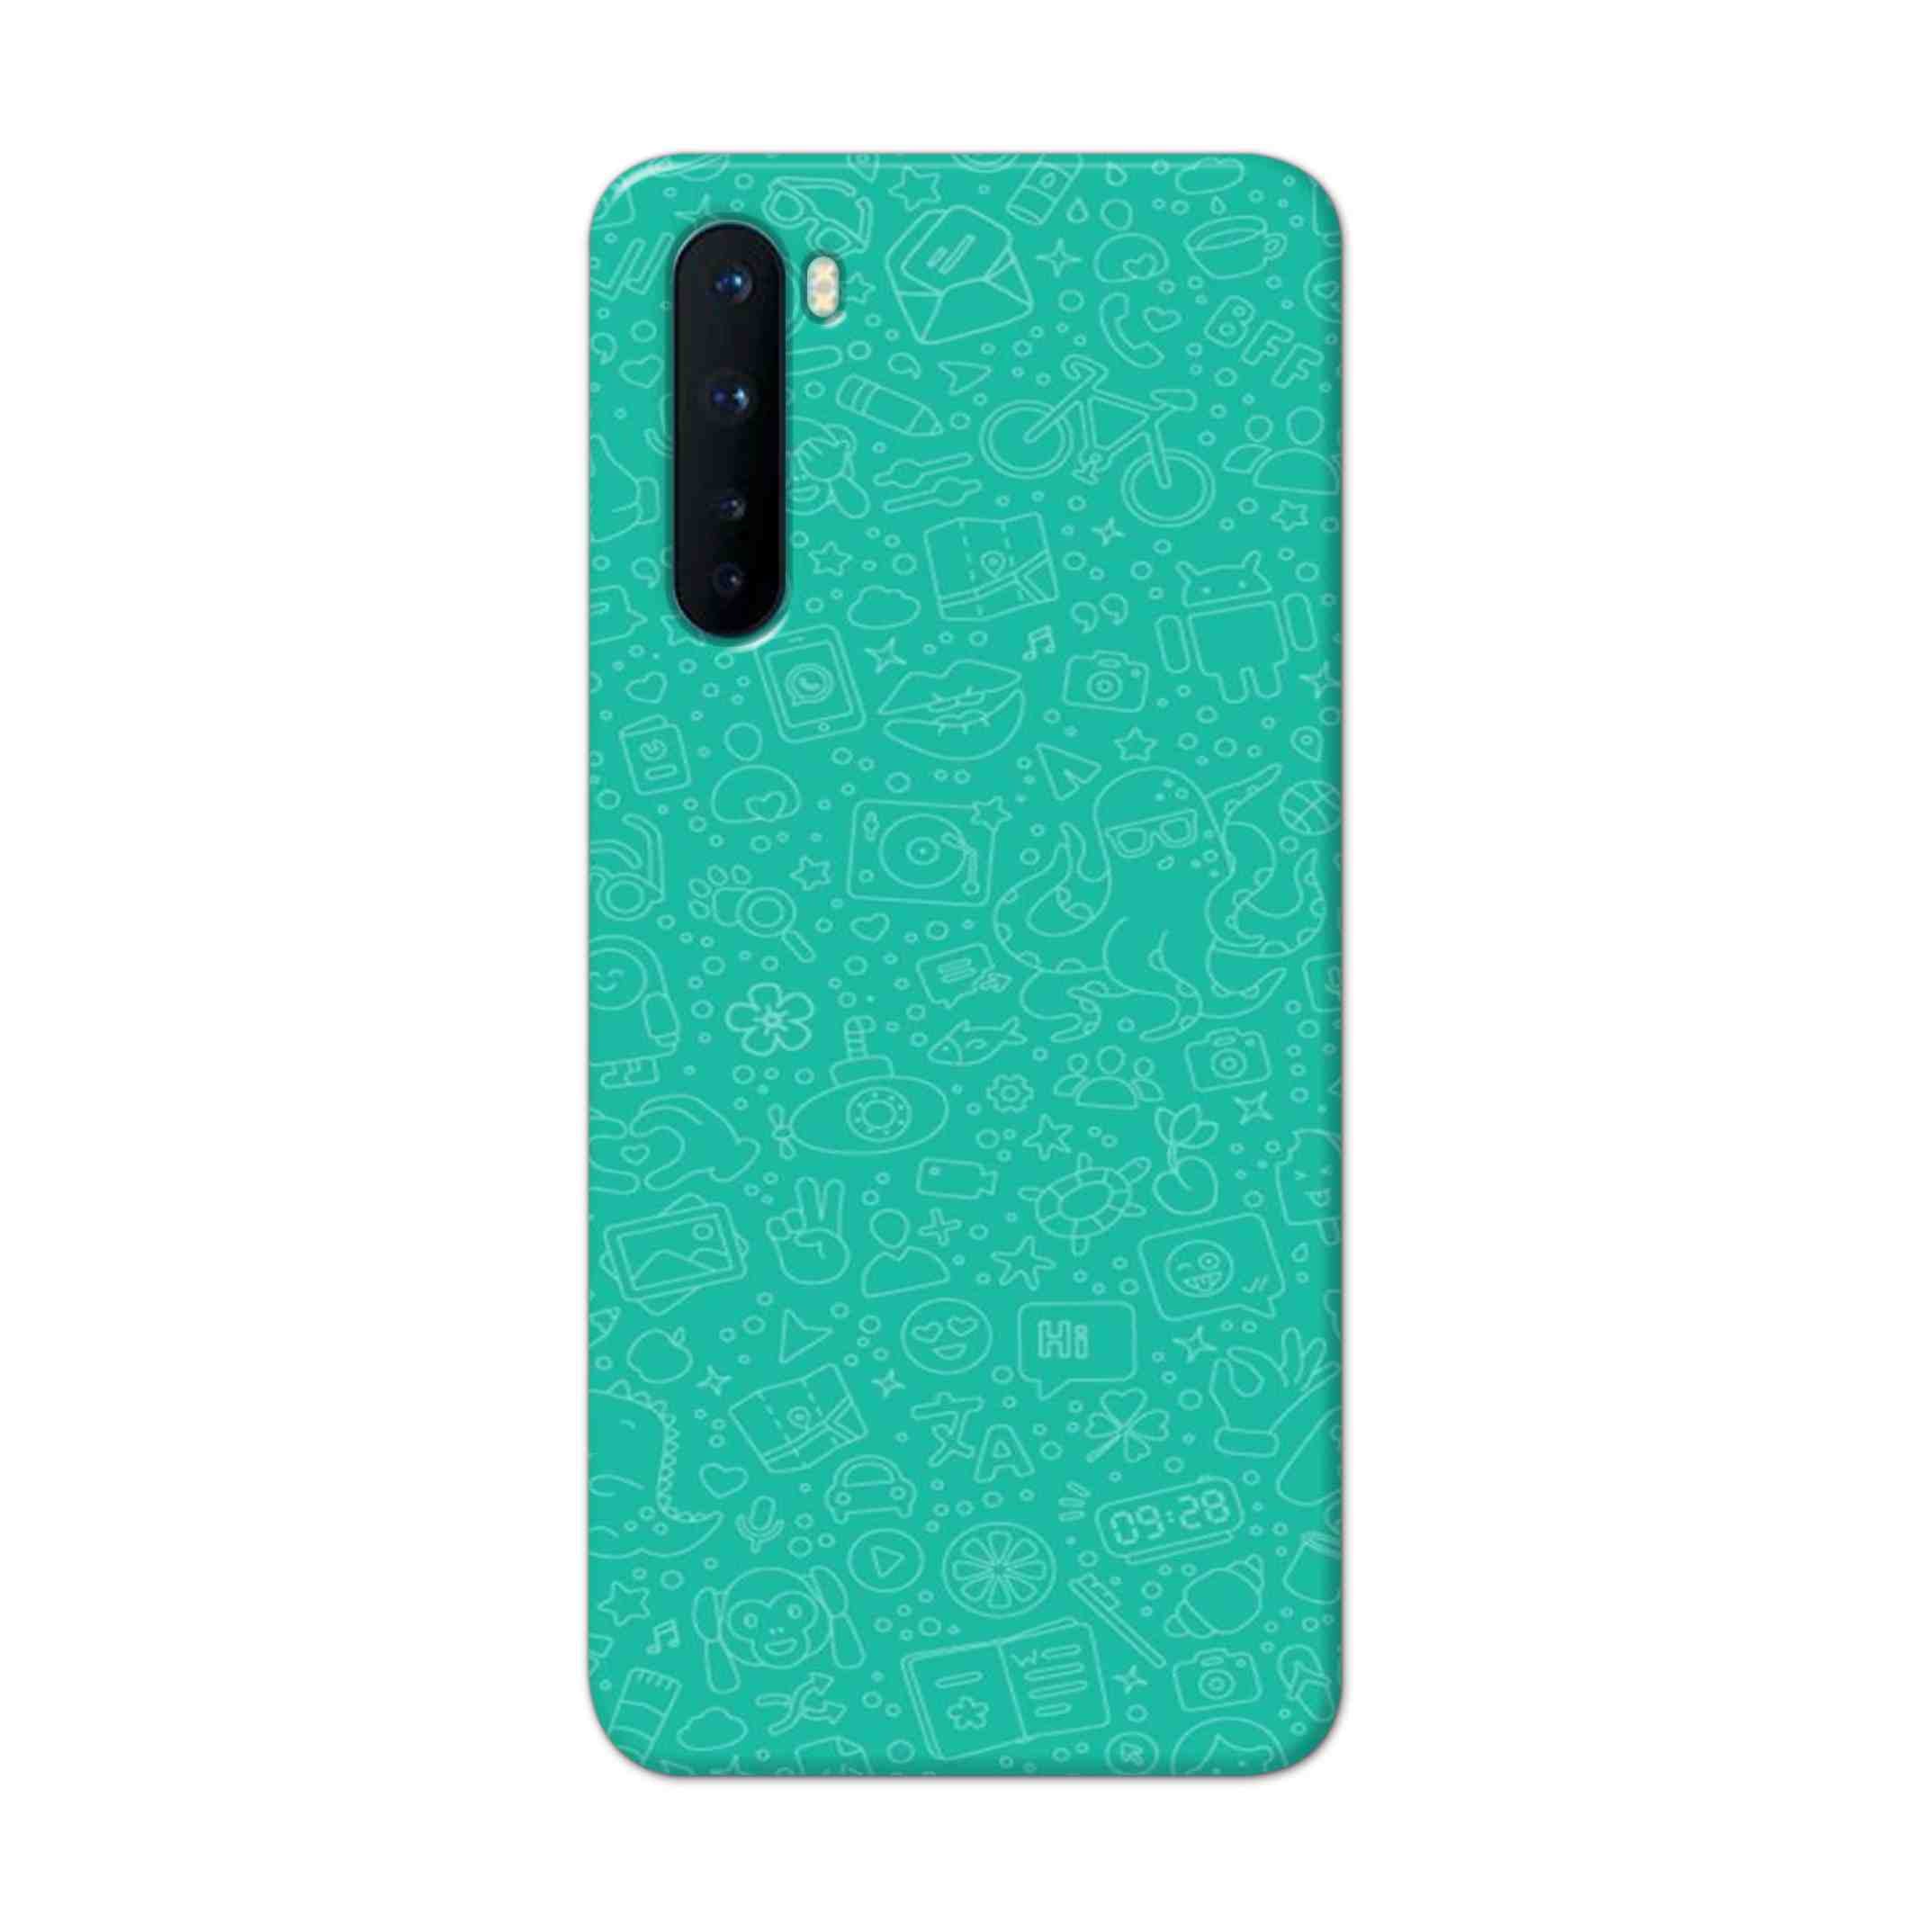 Buy Whatsapp Hard Back Mobile Phone Case Cover For OnePlus Nord Online